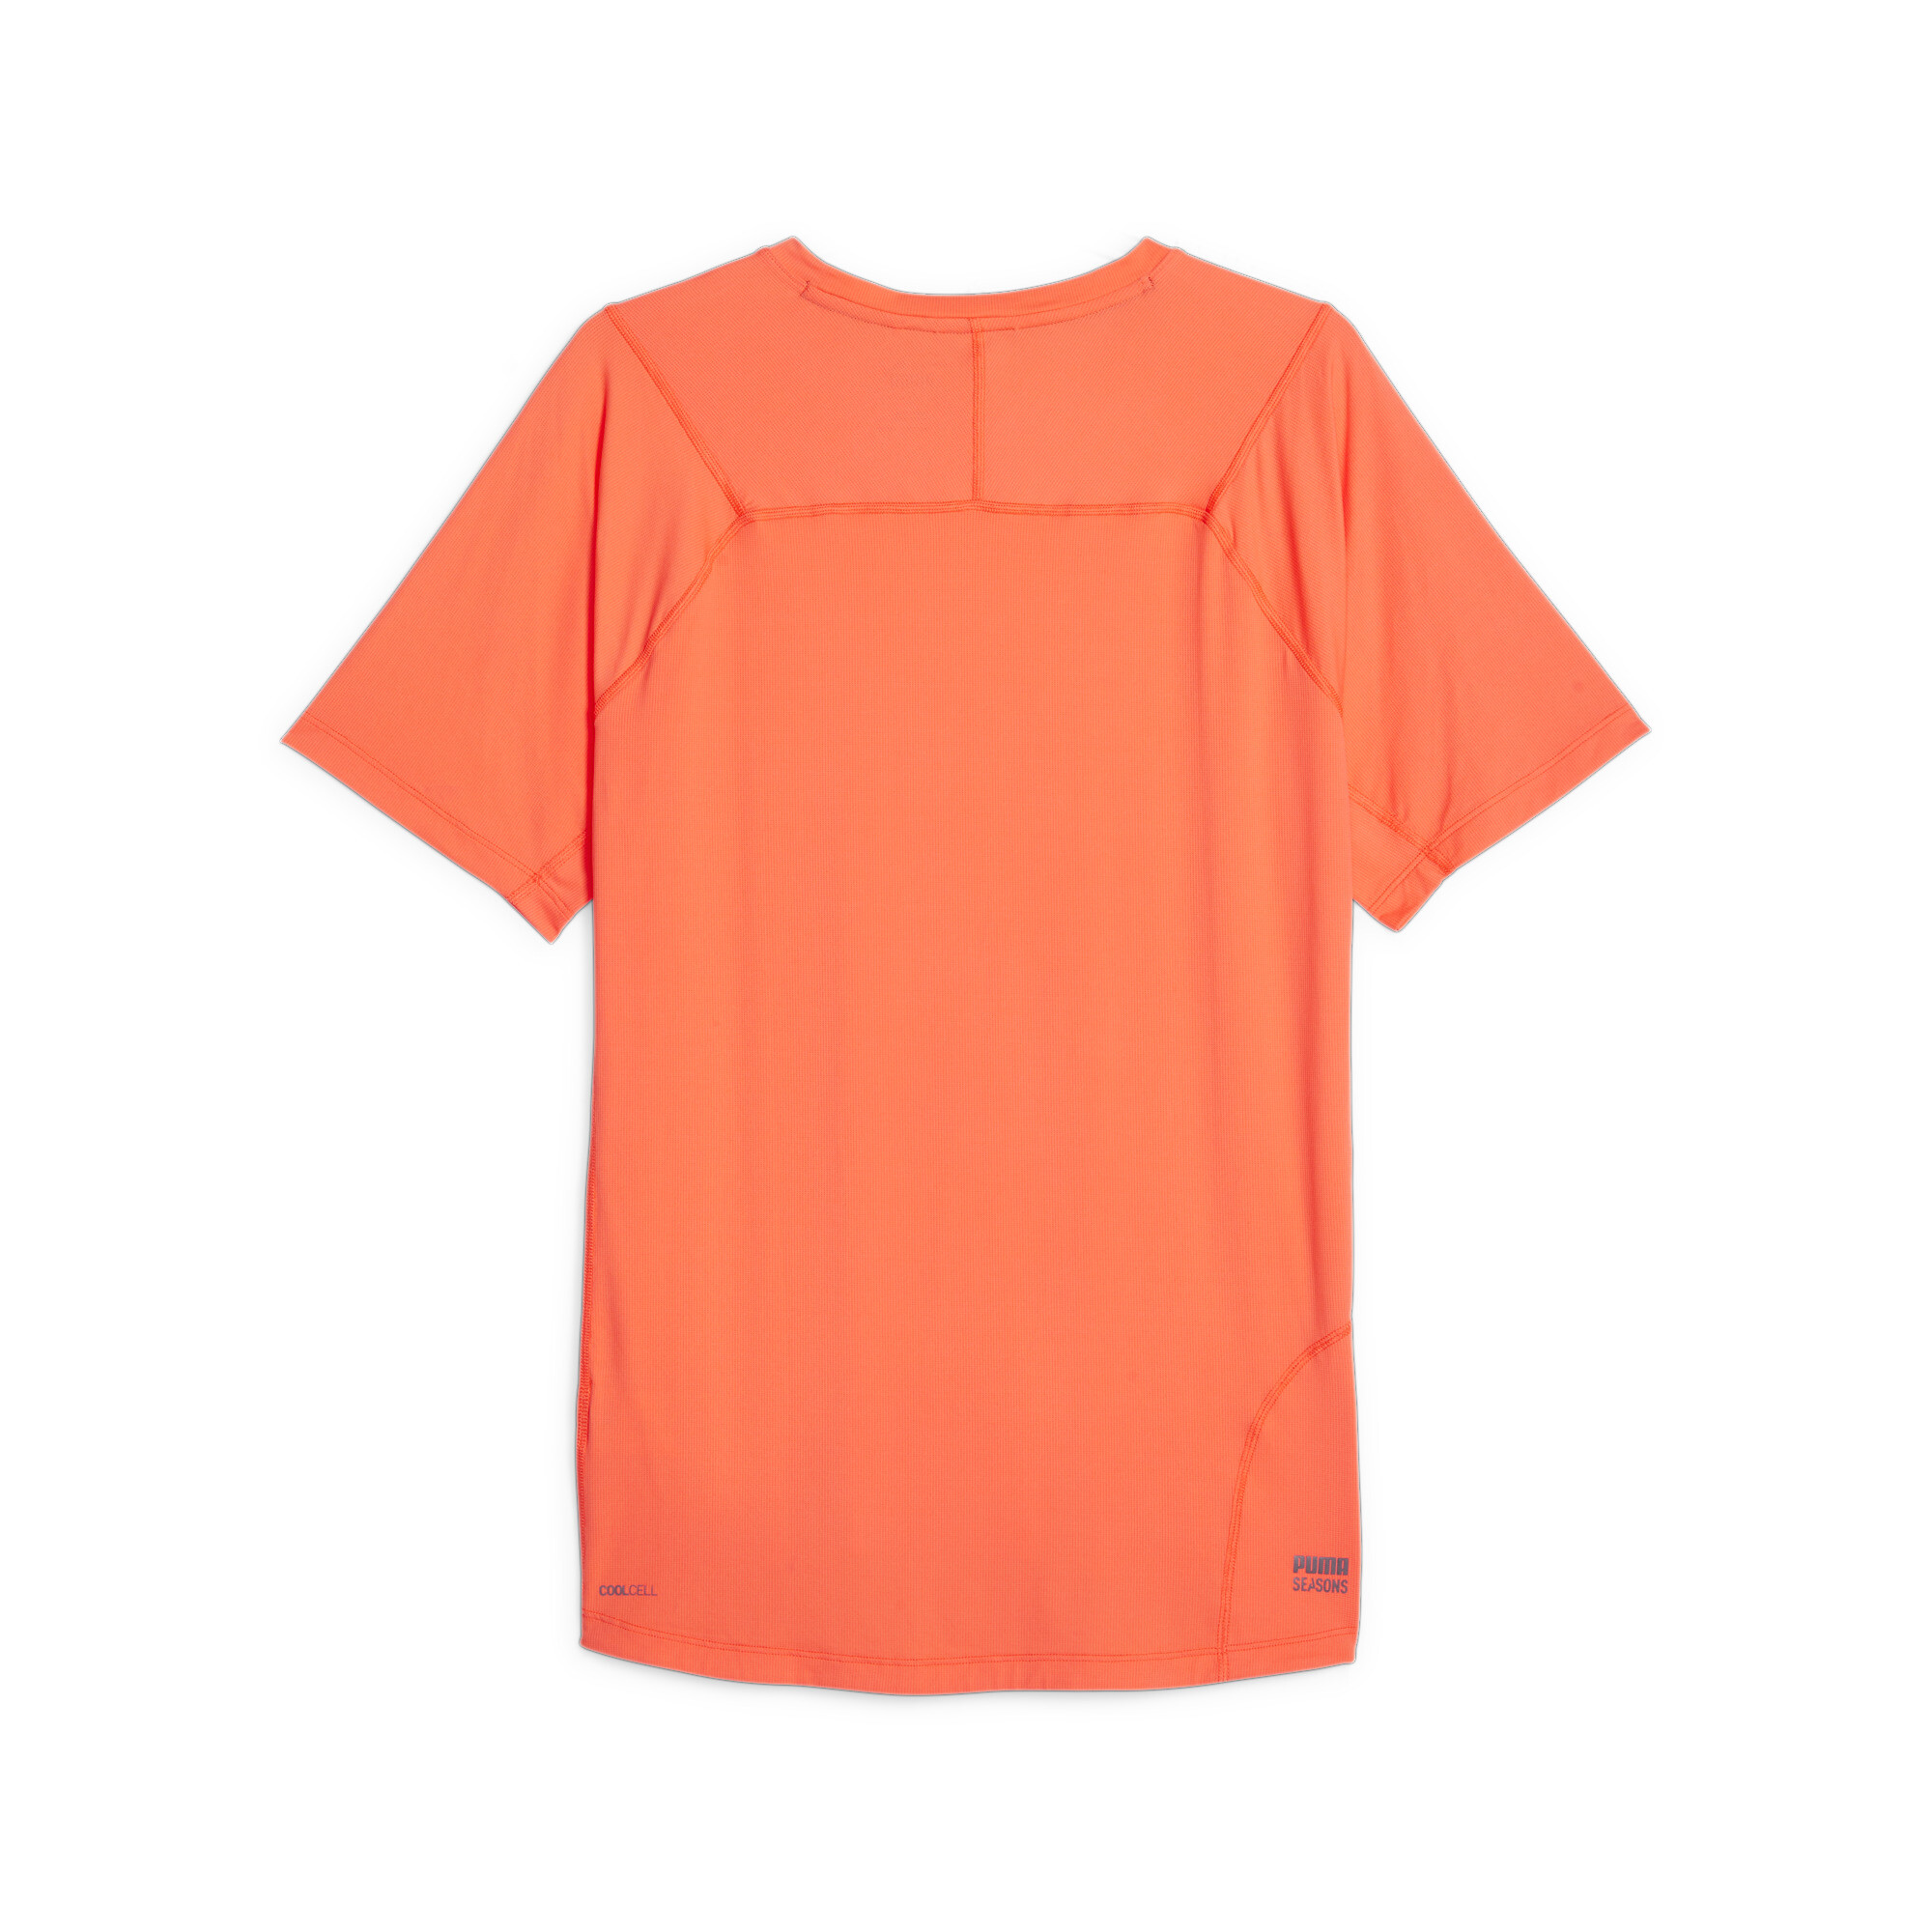 Men's PUMA SEASONS CoolCELL Trail Running T-Shirt In Orange, Size Small